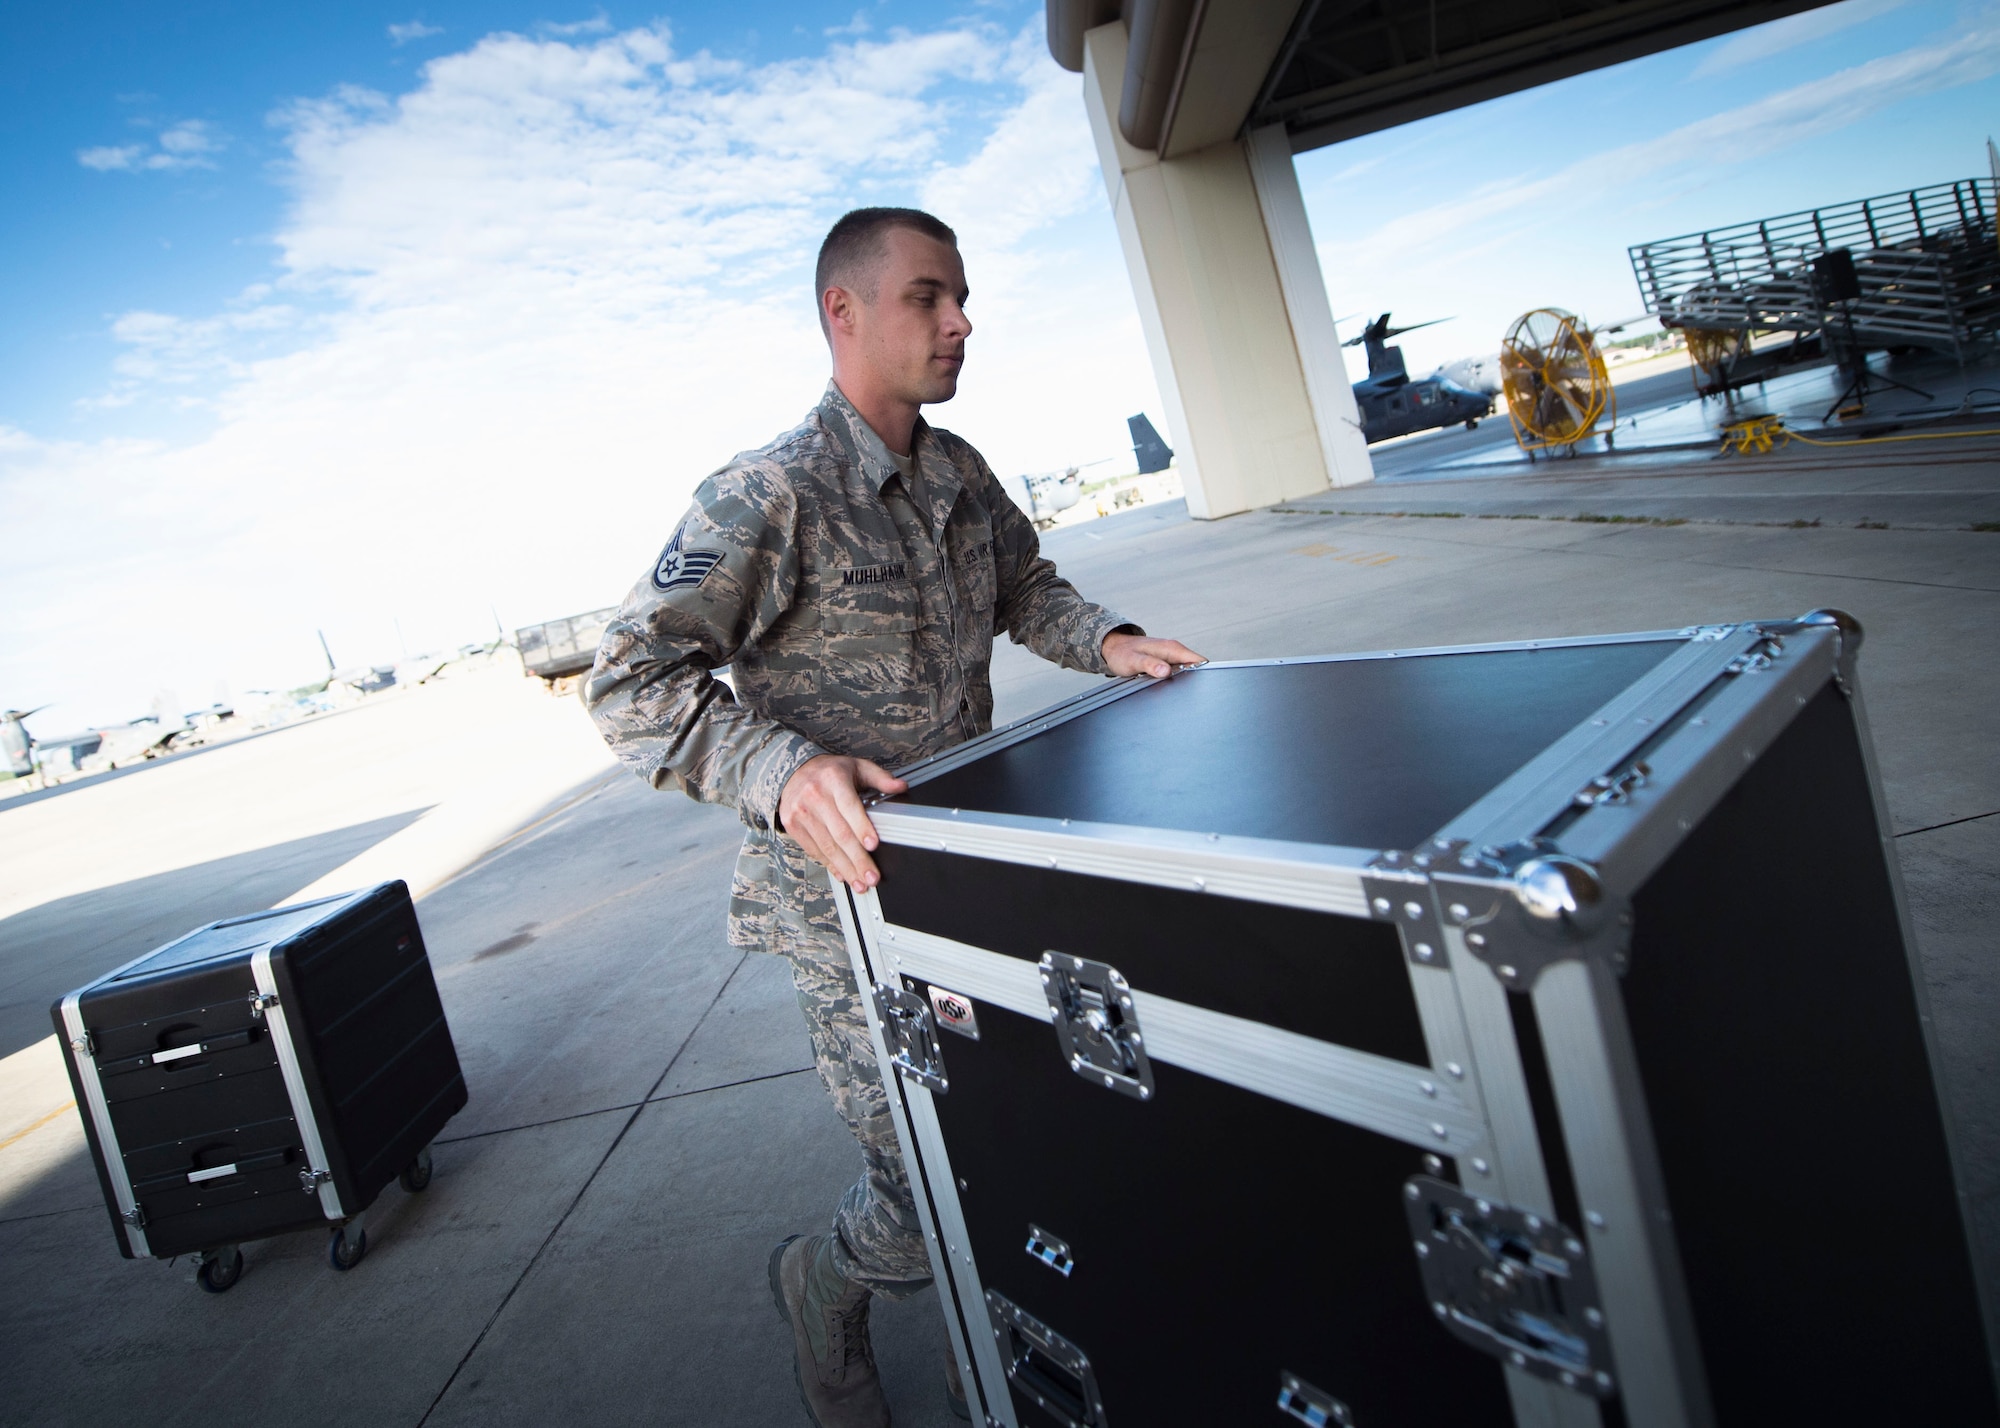 Staff Sgt. Andrew Muhlhahn, a radio frequency systems technician with the 1st Special Operations Communications Squadron, unloads audio equipment at the Freedom Hangar on Hurlburt Field, Fla., July 15, 2016. Airmen from the 1st SOCS are charged with an additional duty to setup audio systems for public address at base functions. (U.S. Air Force photo by Senior Airman Krystal M. Garrett)
